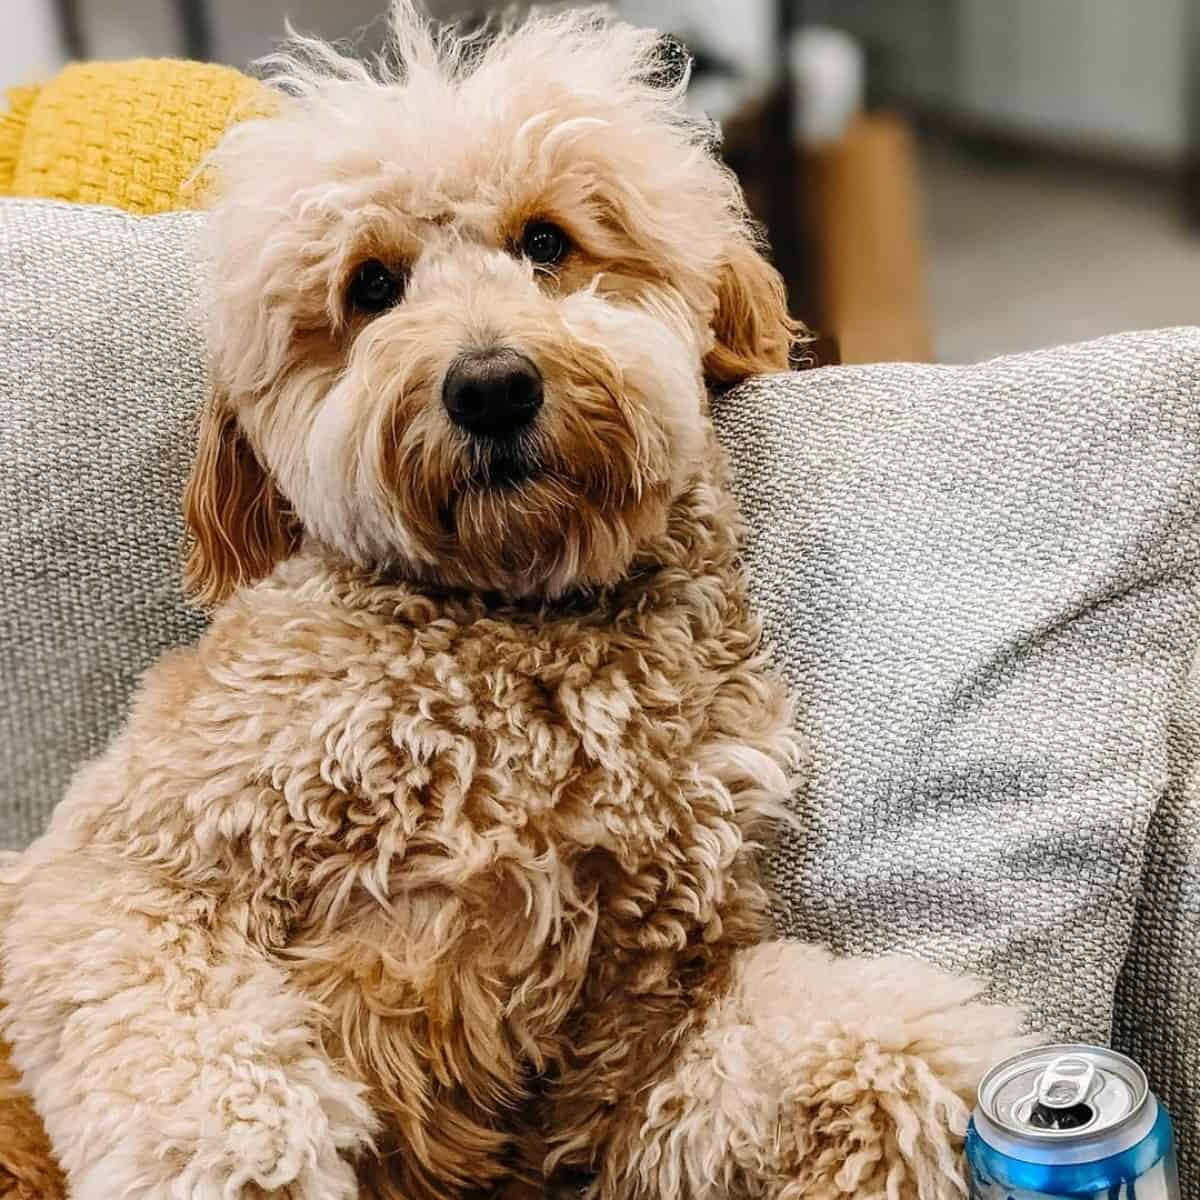 Goldendoodle did not drink the beer